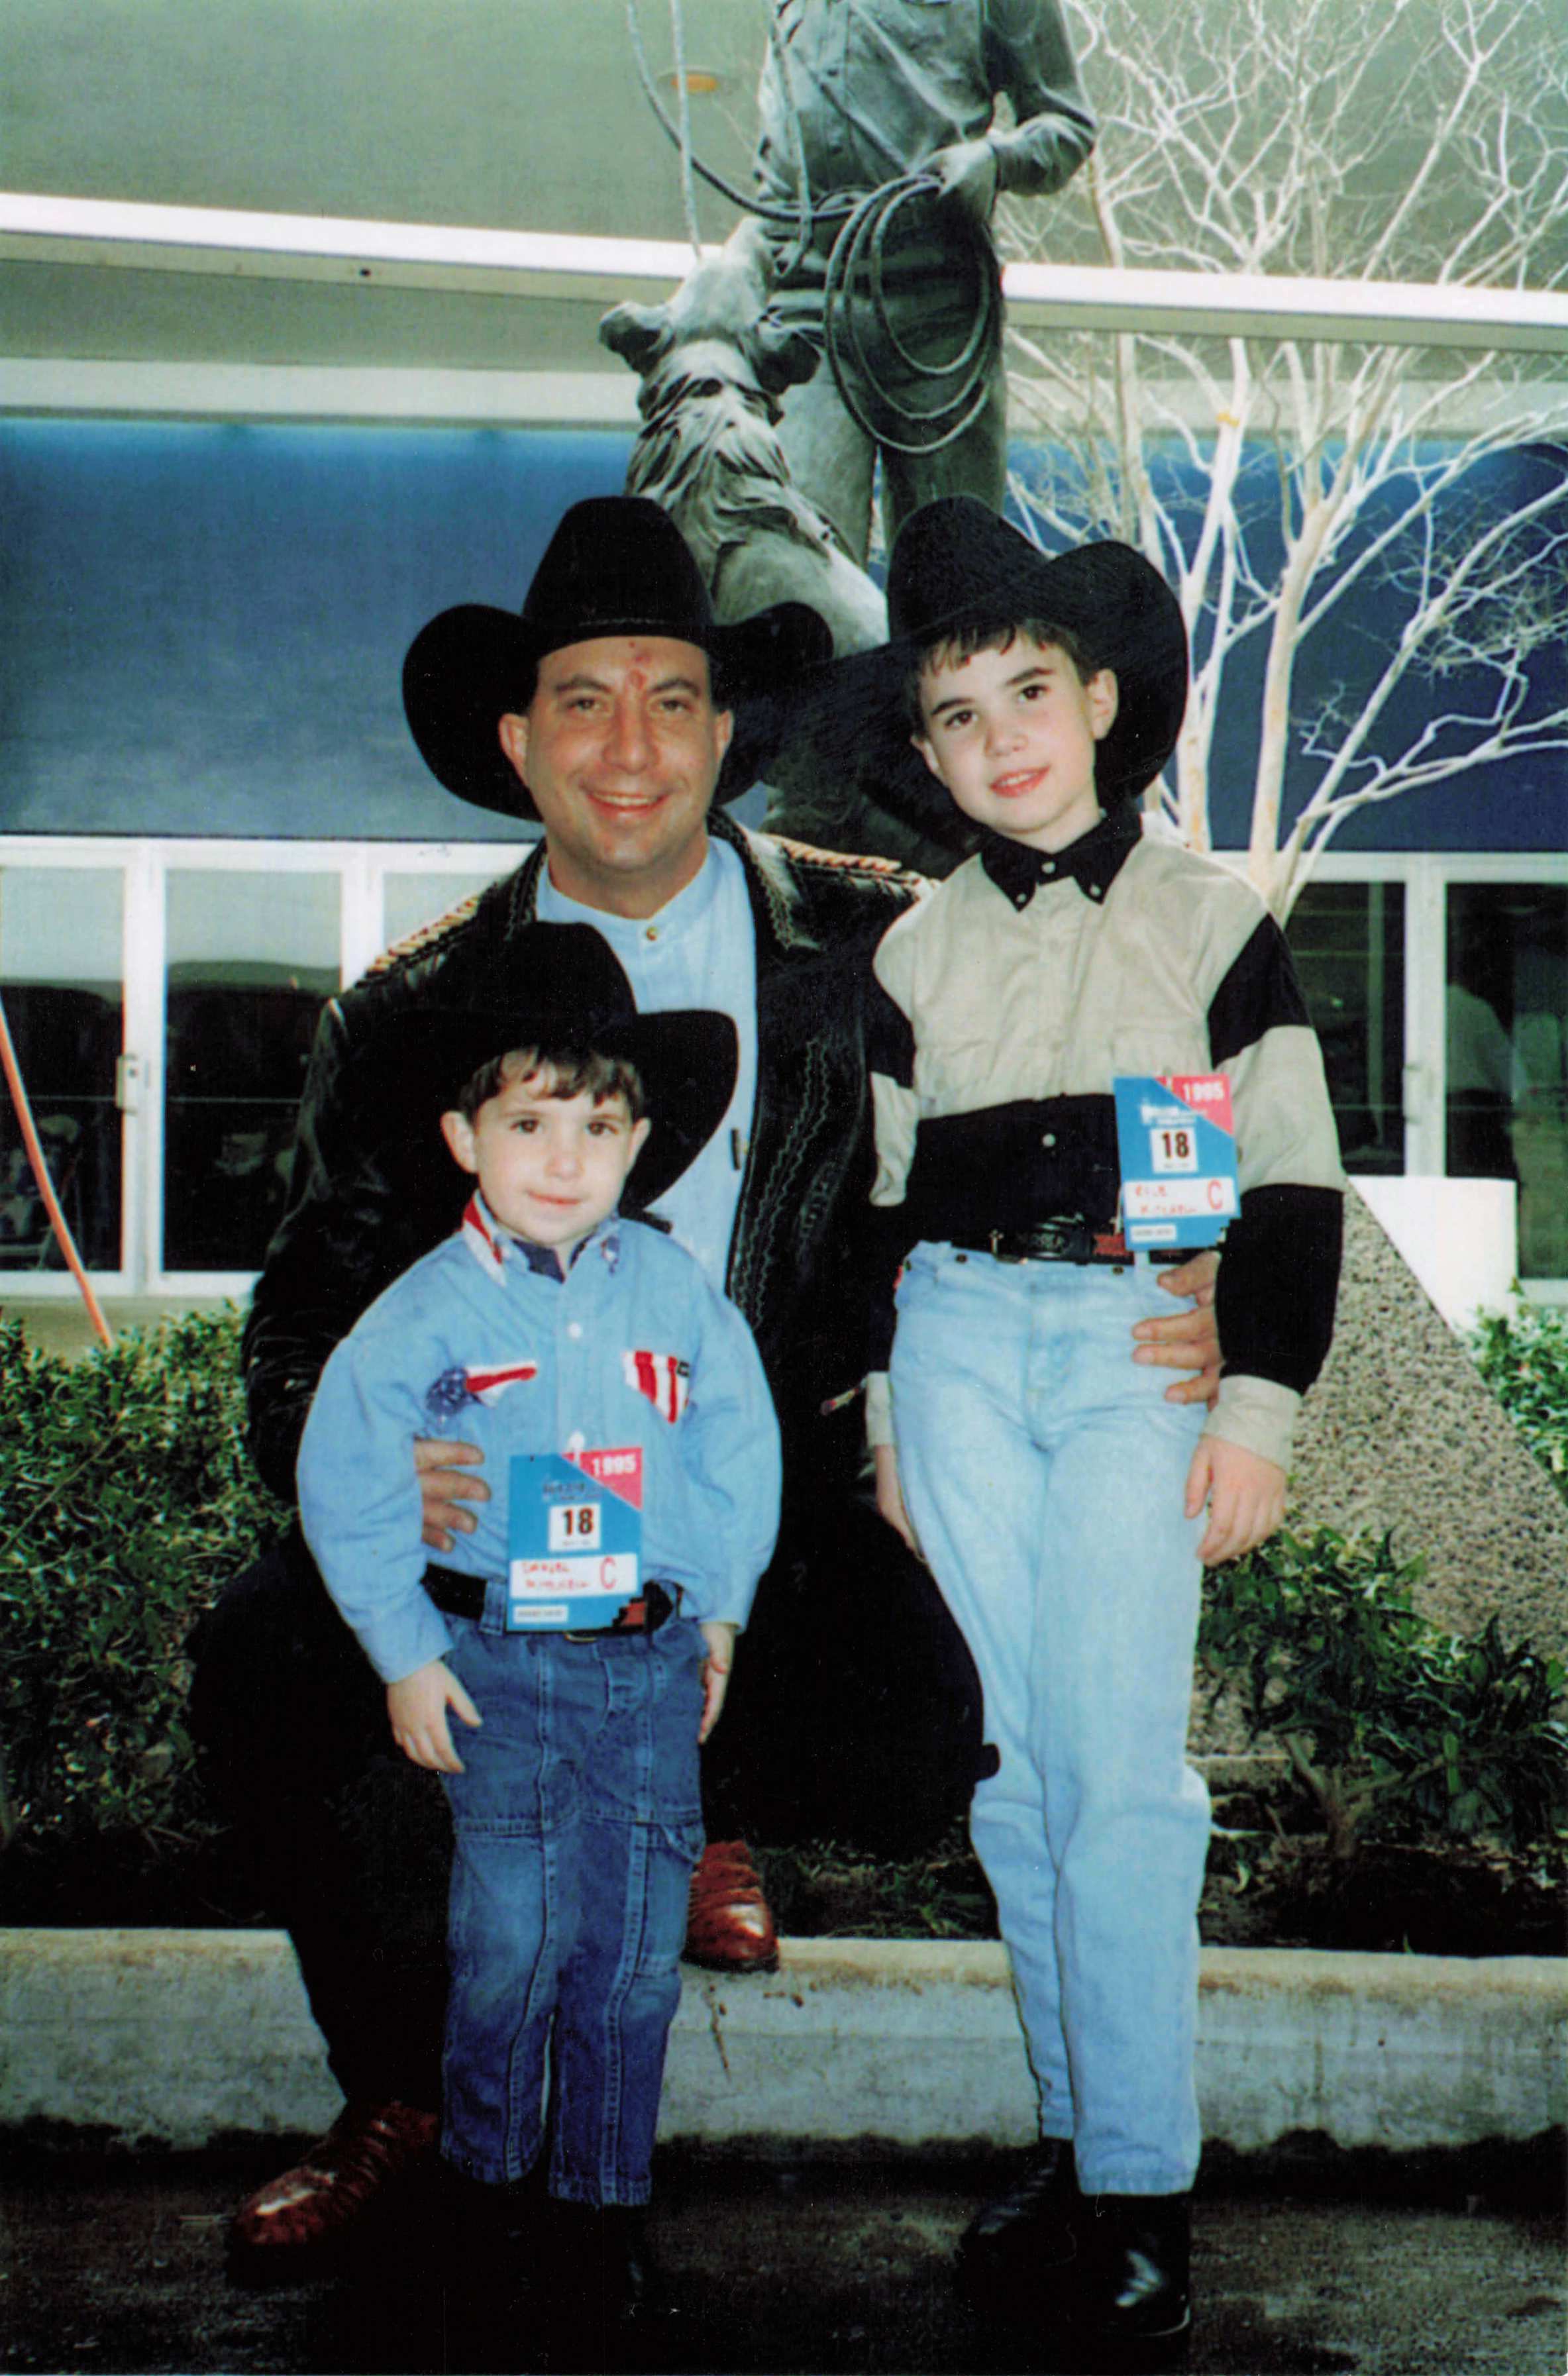 Jim, Kyle, and Dan at the Houston Livestock Show and Rodeo